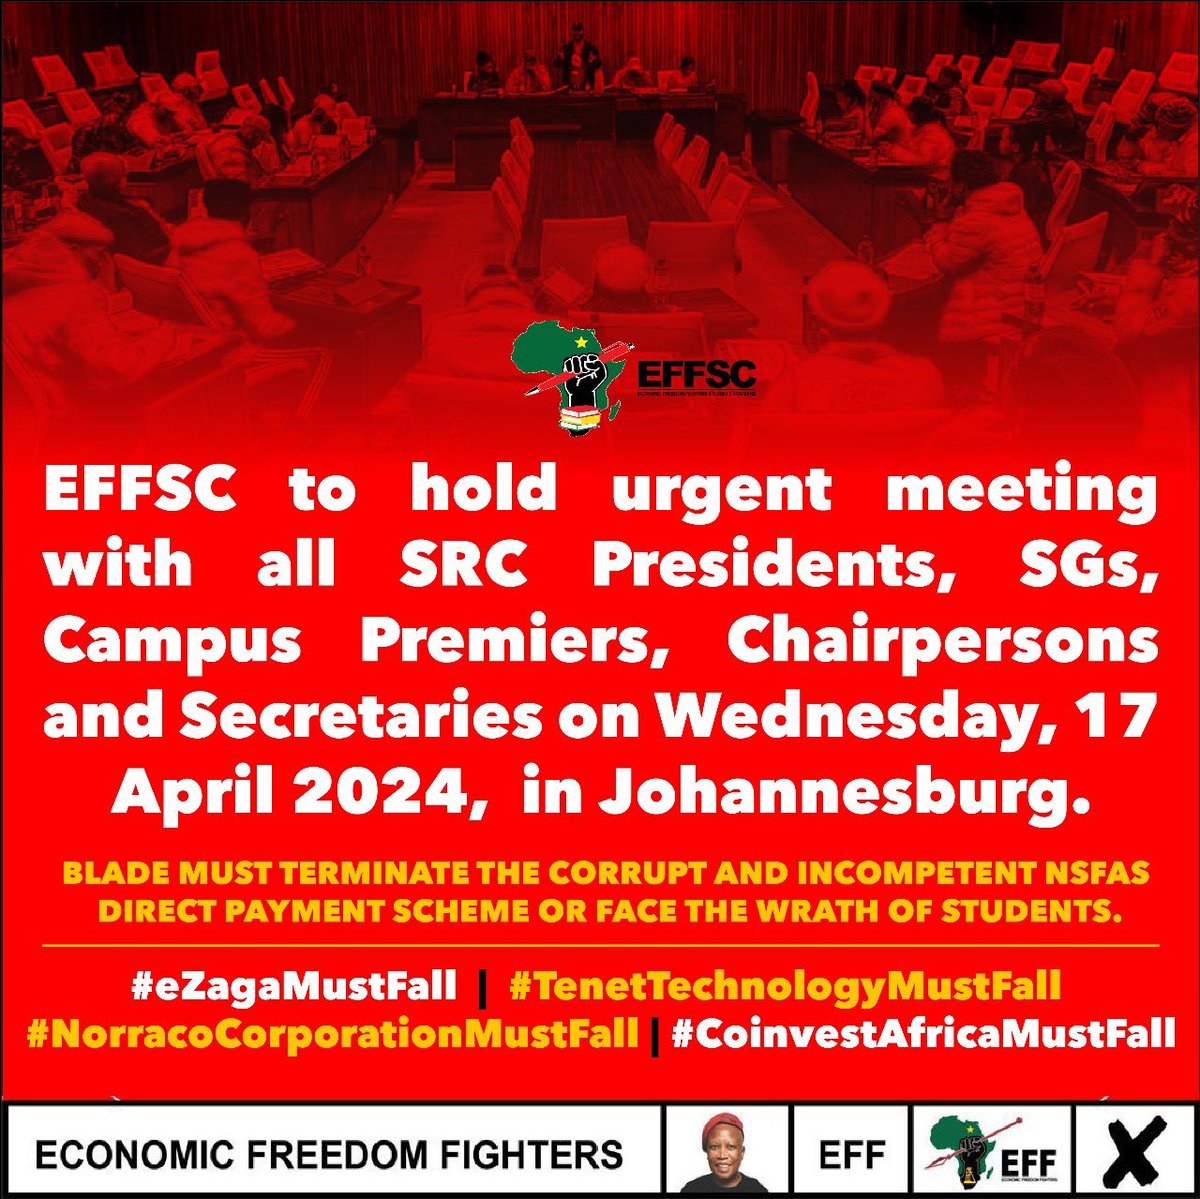 ♦️EFFSC URGENT NATIONAL MEETING OF SRCs♦️ Blade must terminate the corrupt and incompetent NSFAS Direct Payment Scheme or face the wrath of students. #eZagaMustFall #TenetTechnologyMustFall #NorracoCorporationMustFall #CoinvestAfricaMustFall @DrBladeNzimande